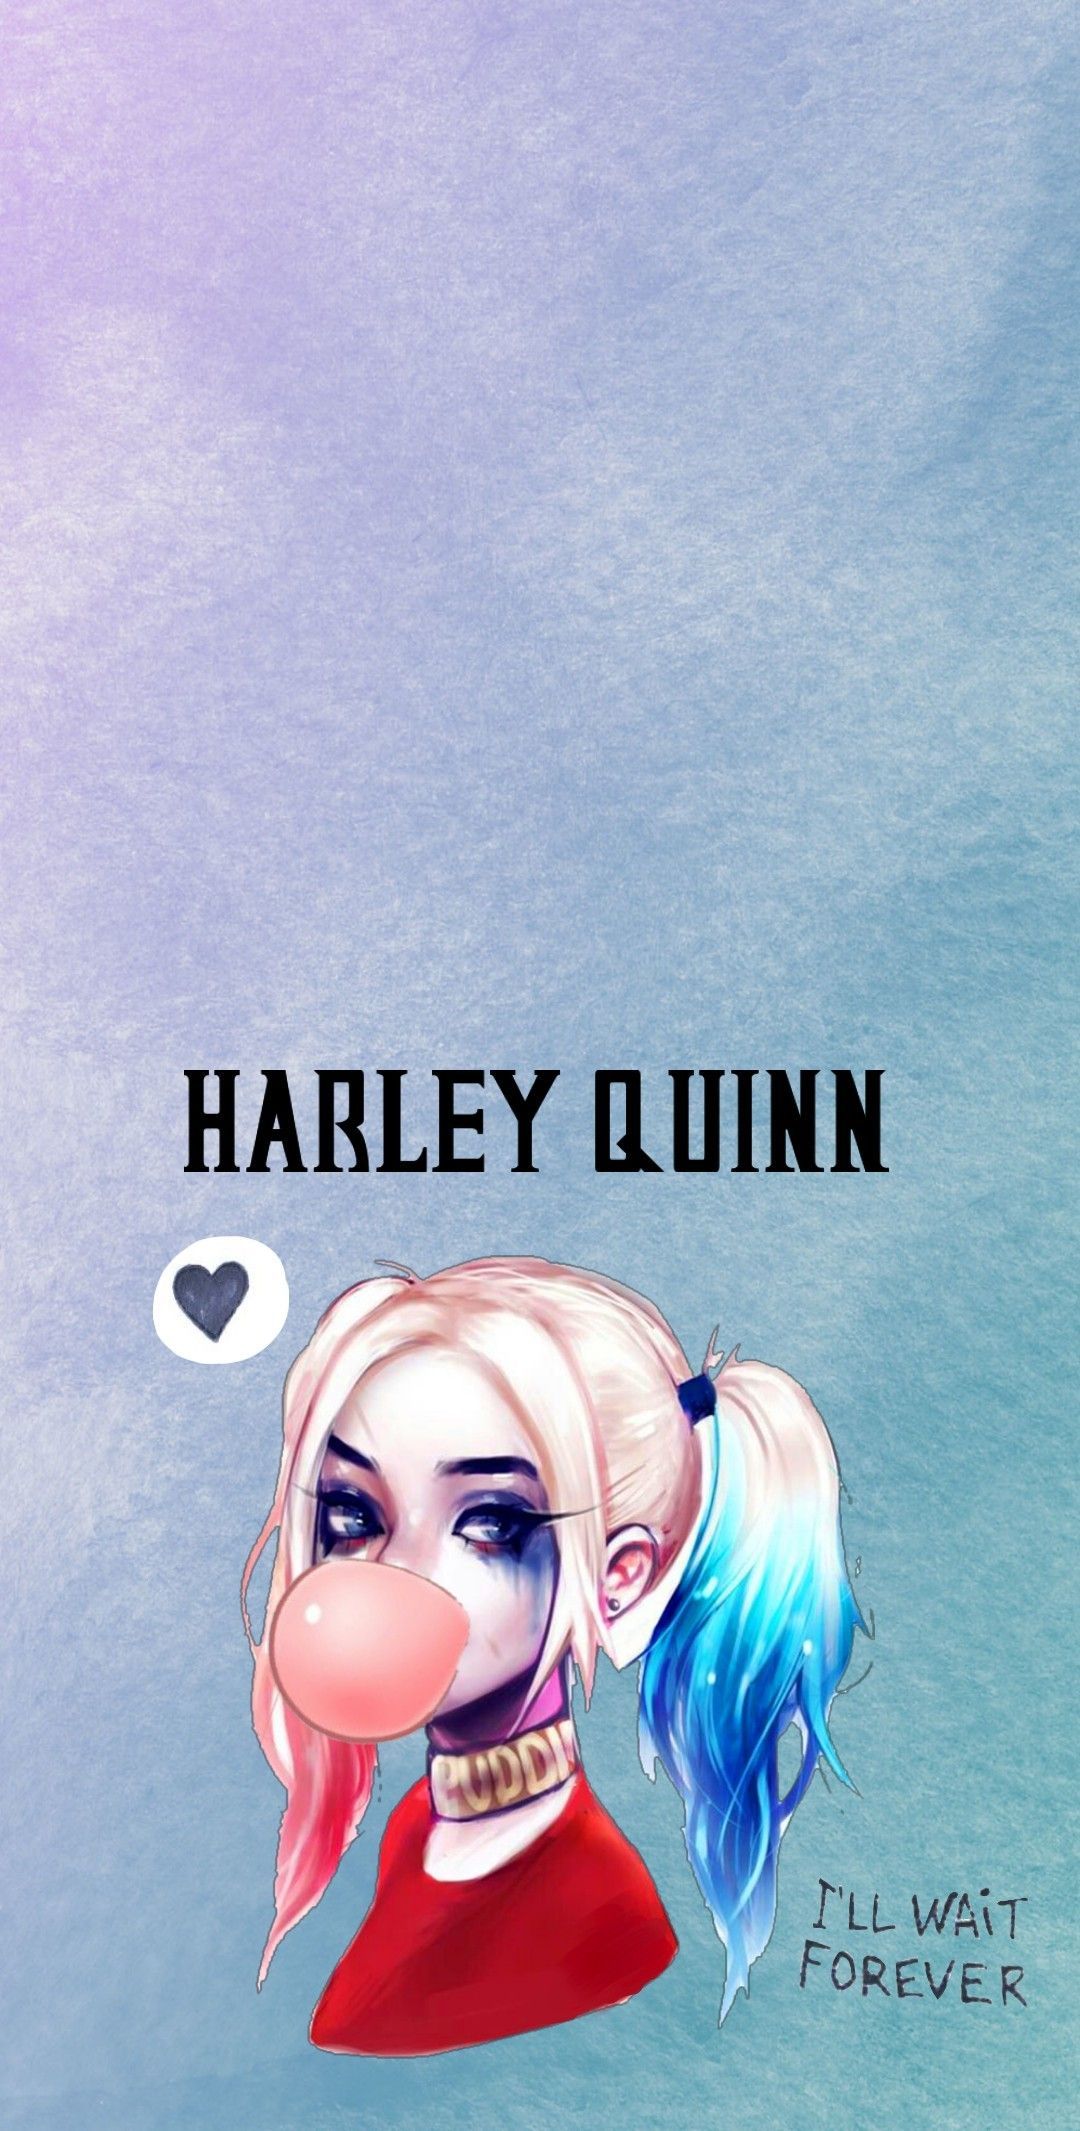 Harley Quinn Quotes Wallpapers - Wallpaper Cave